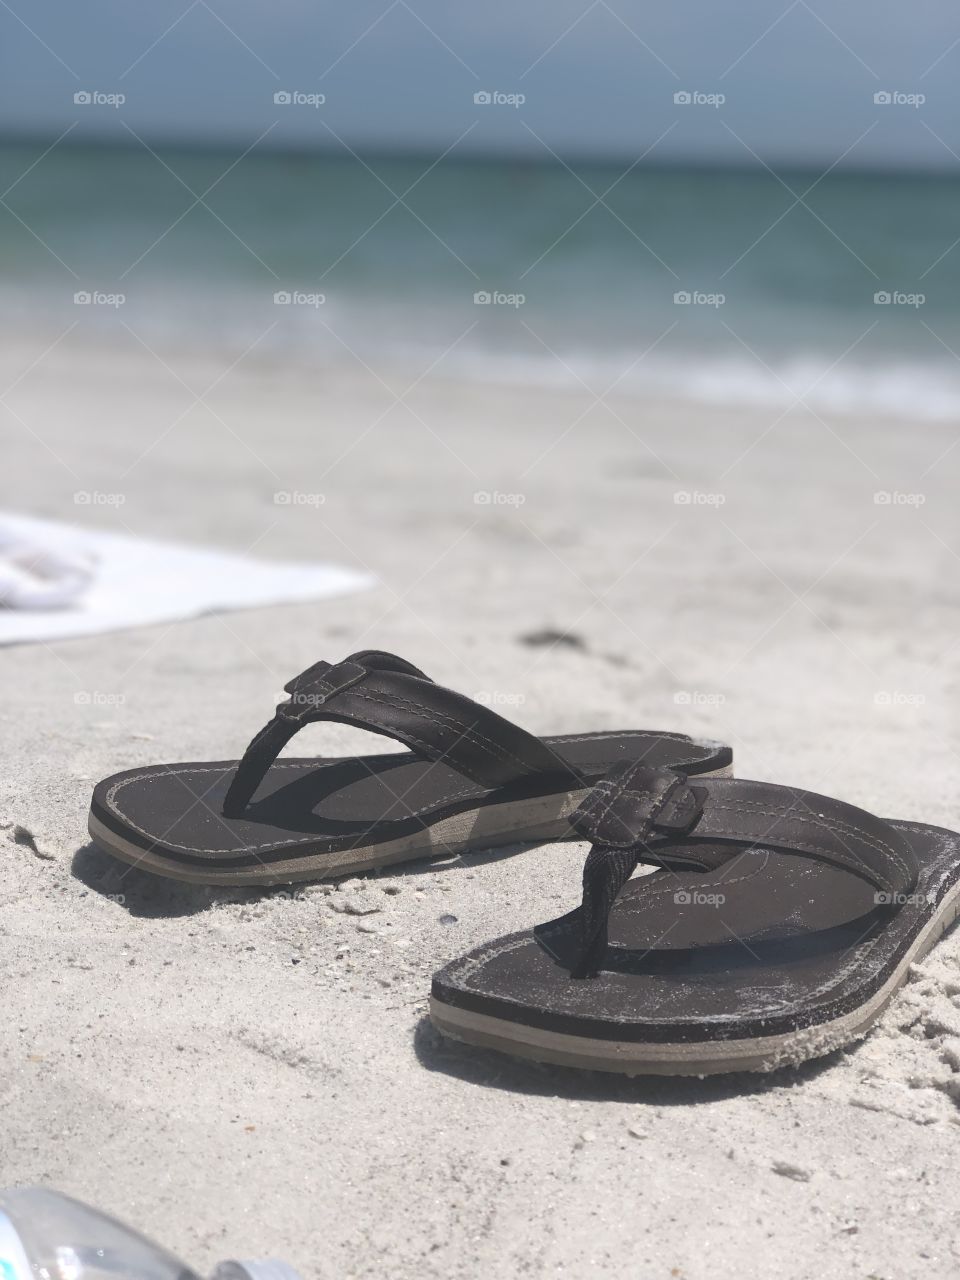 Flip Flops and towel laying in the sand on the beach. Waves crashing in the background. Summer beach day.